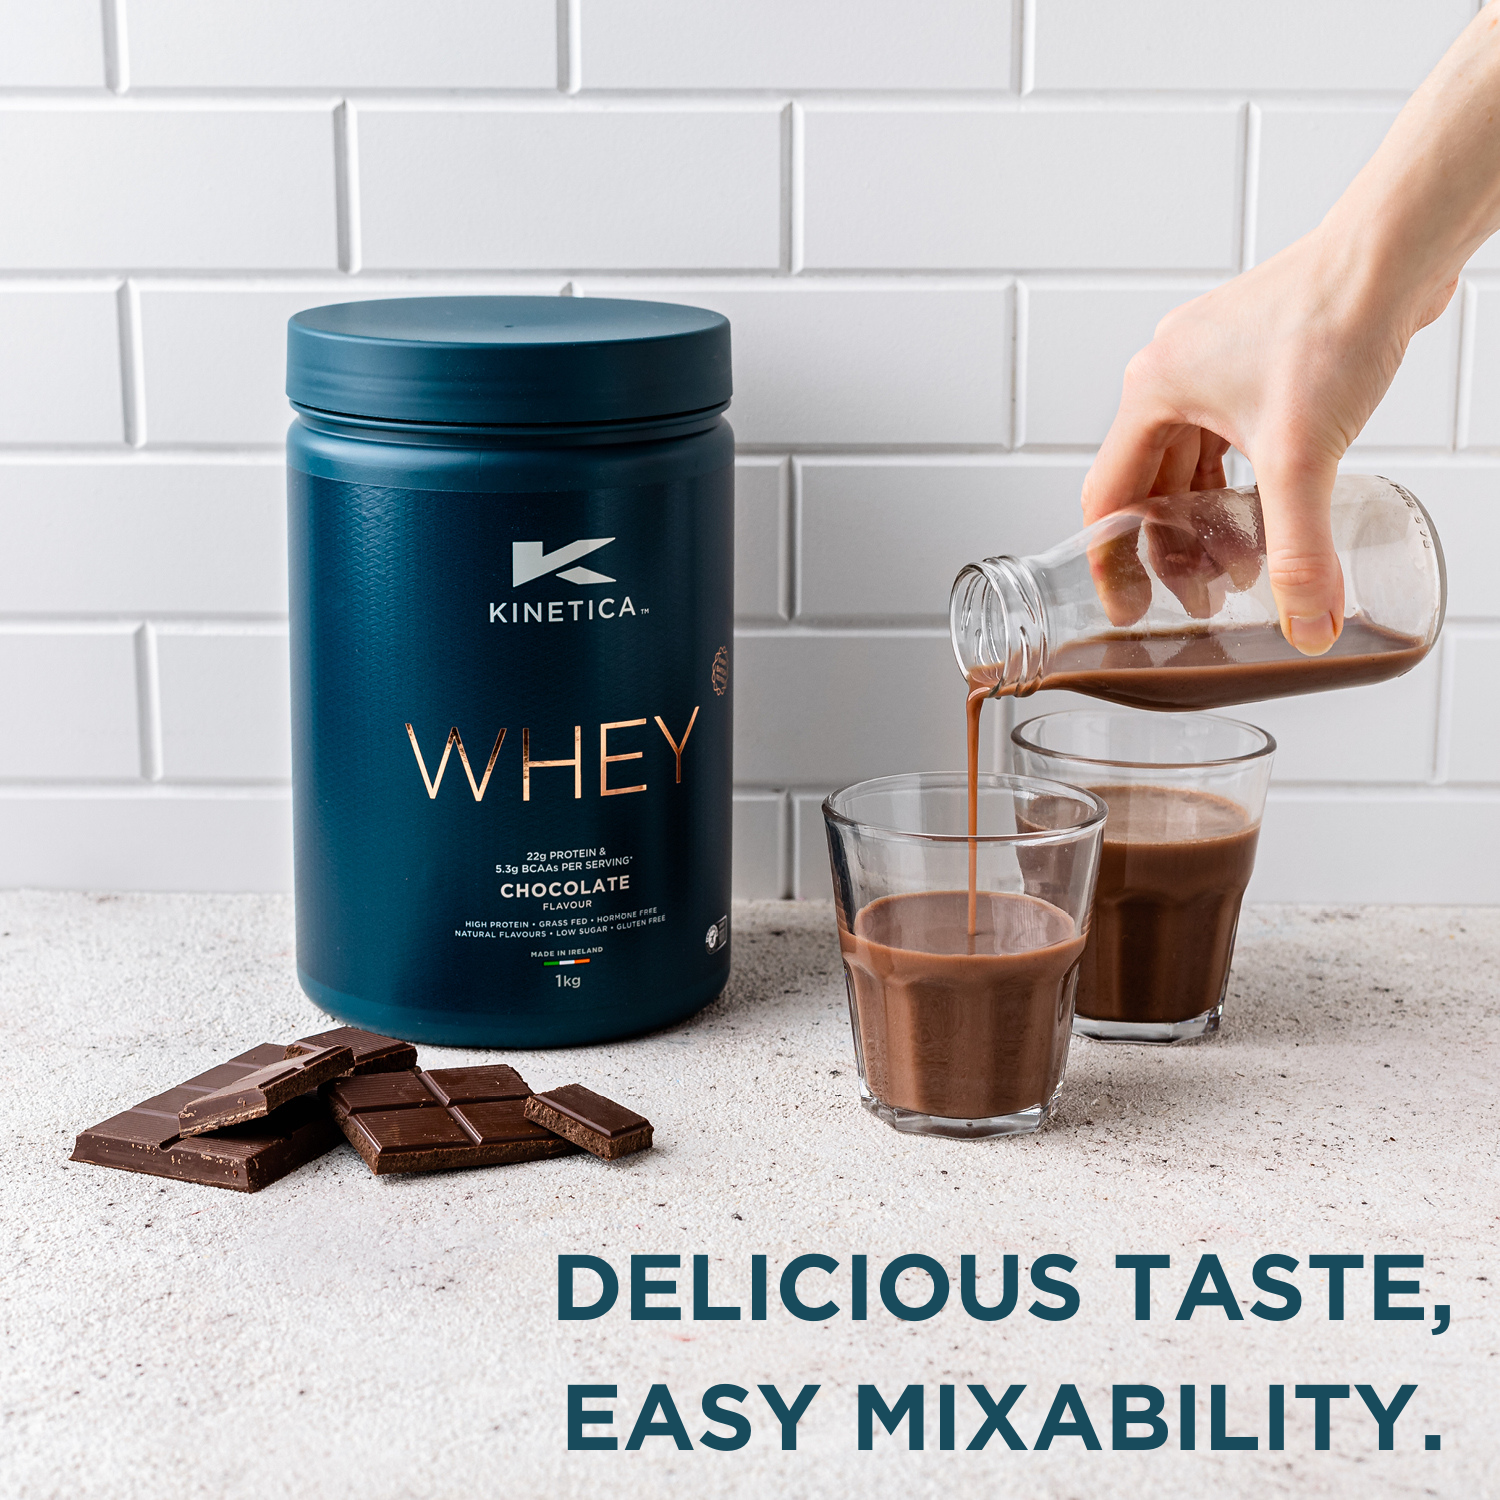 Whey protein powder, chocolate mint protein powder, trusted by professional athletes, WADA tested, delicious taste, easy mixability